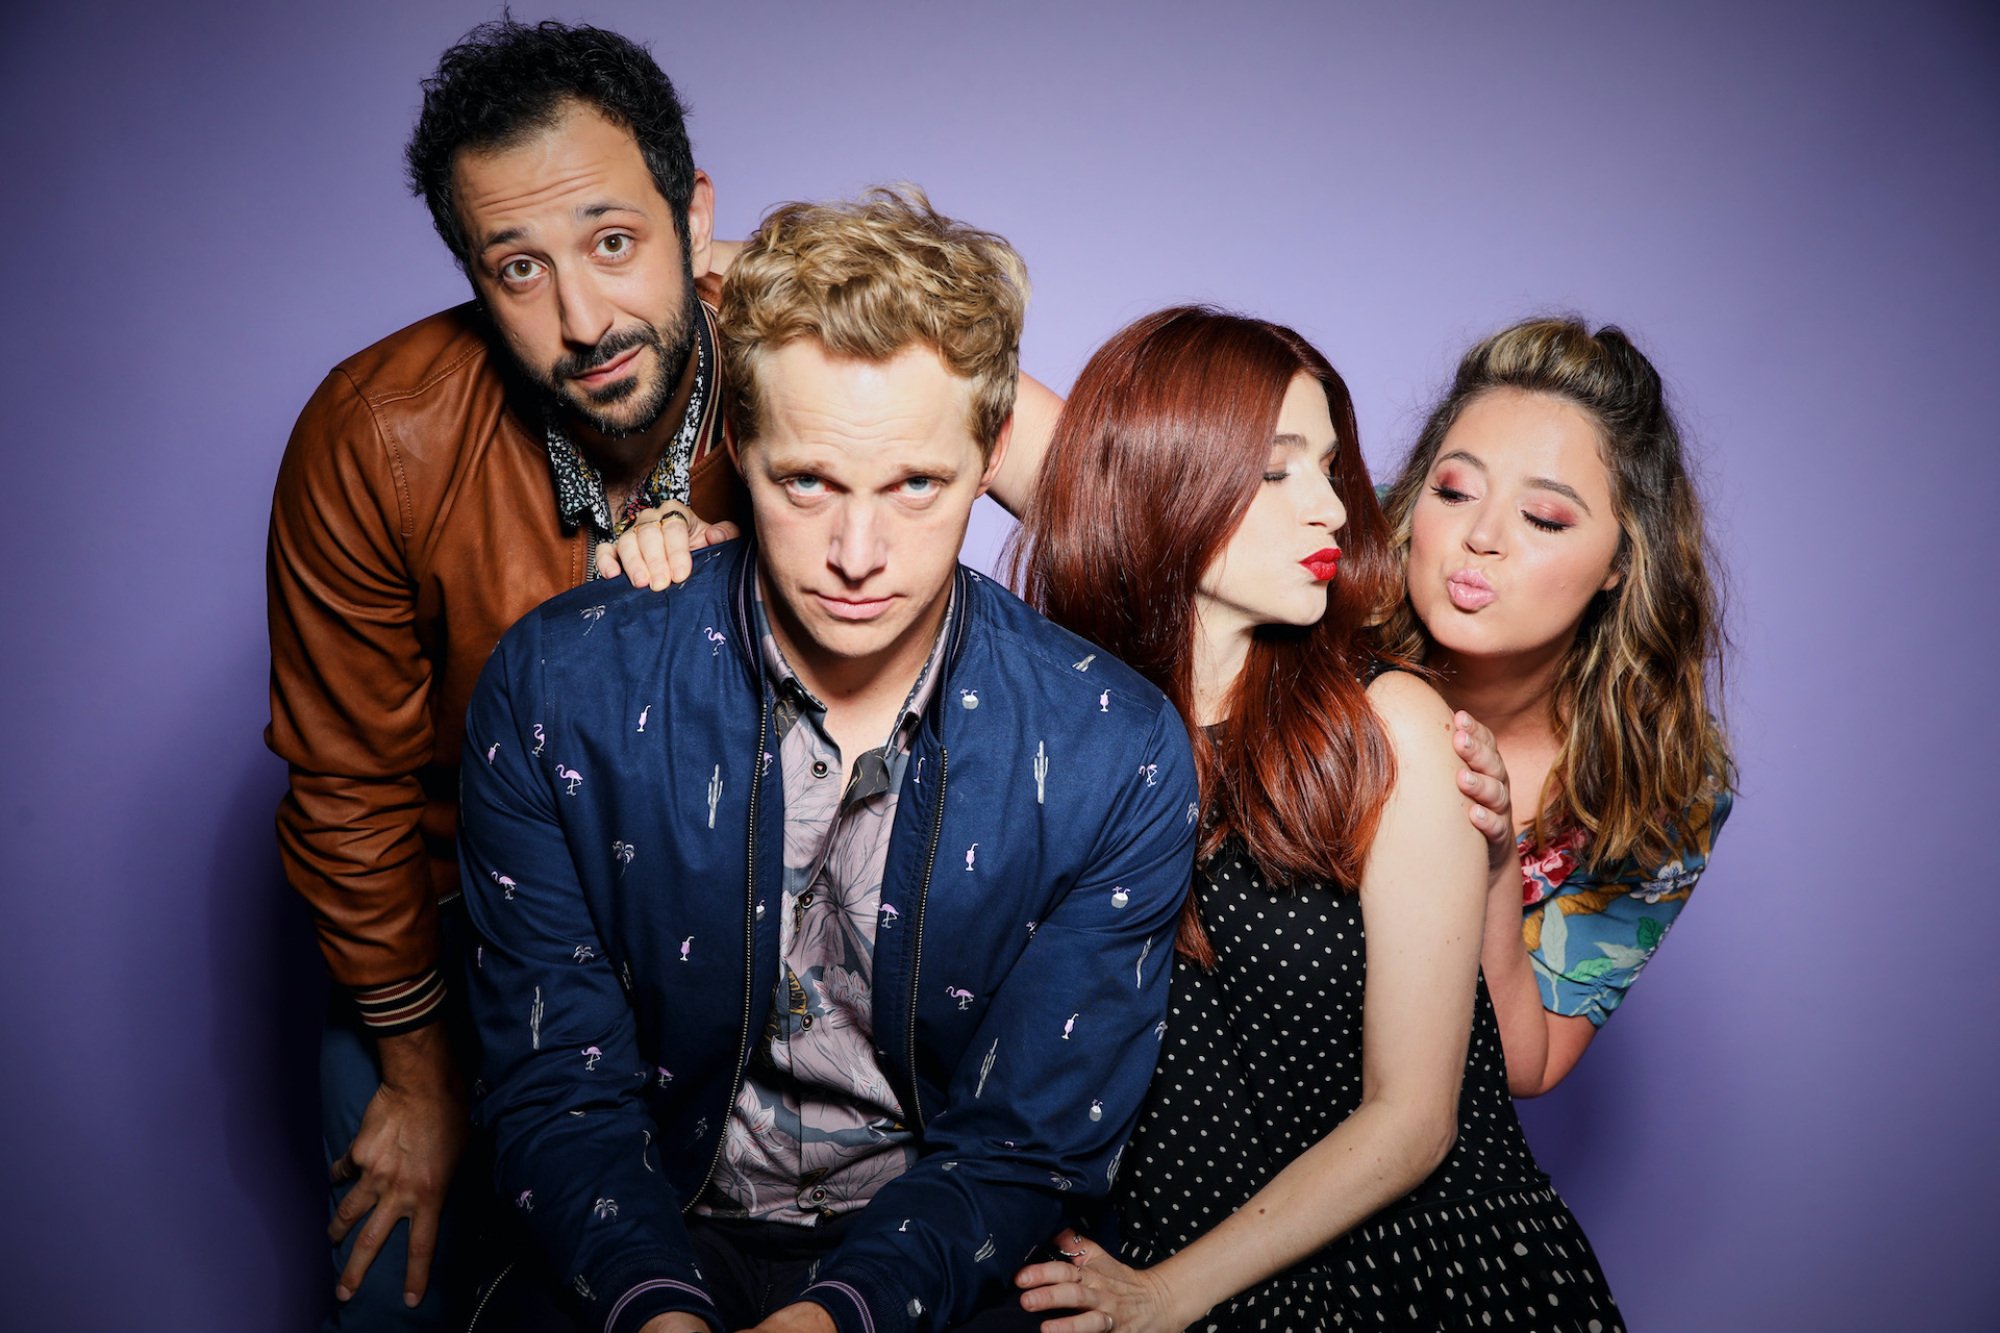 Desmin Borges, Chris Geere, Aya Cash, and Kether Donohue from "You're the Worst"